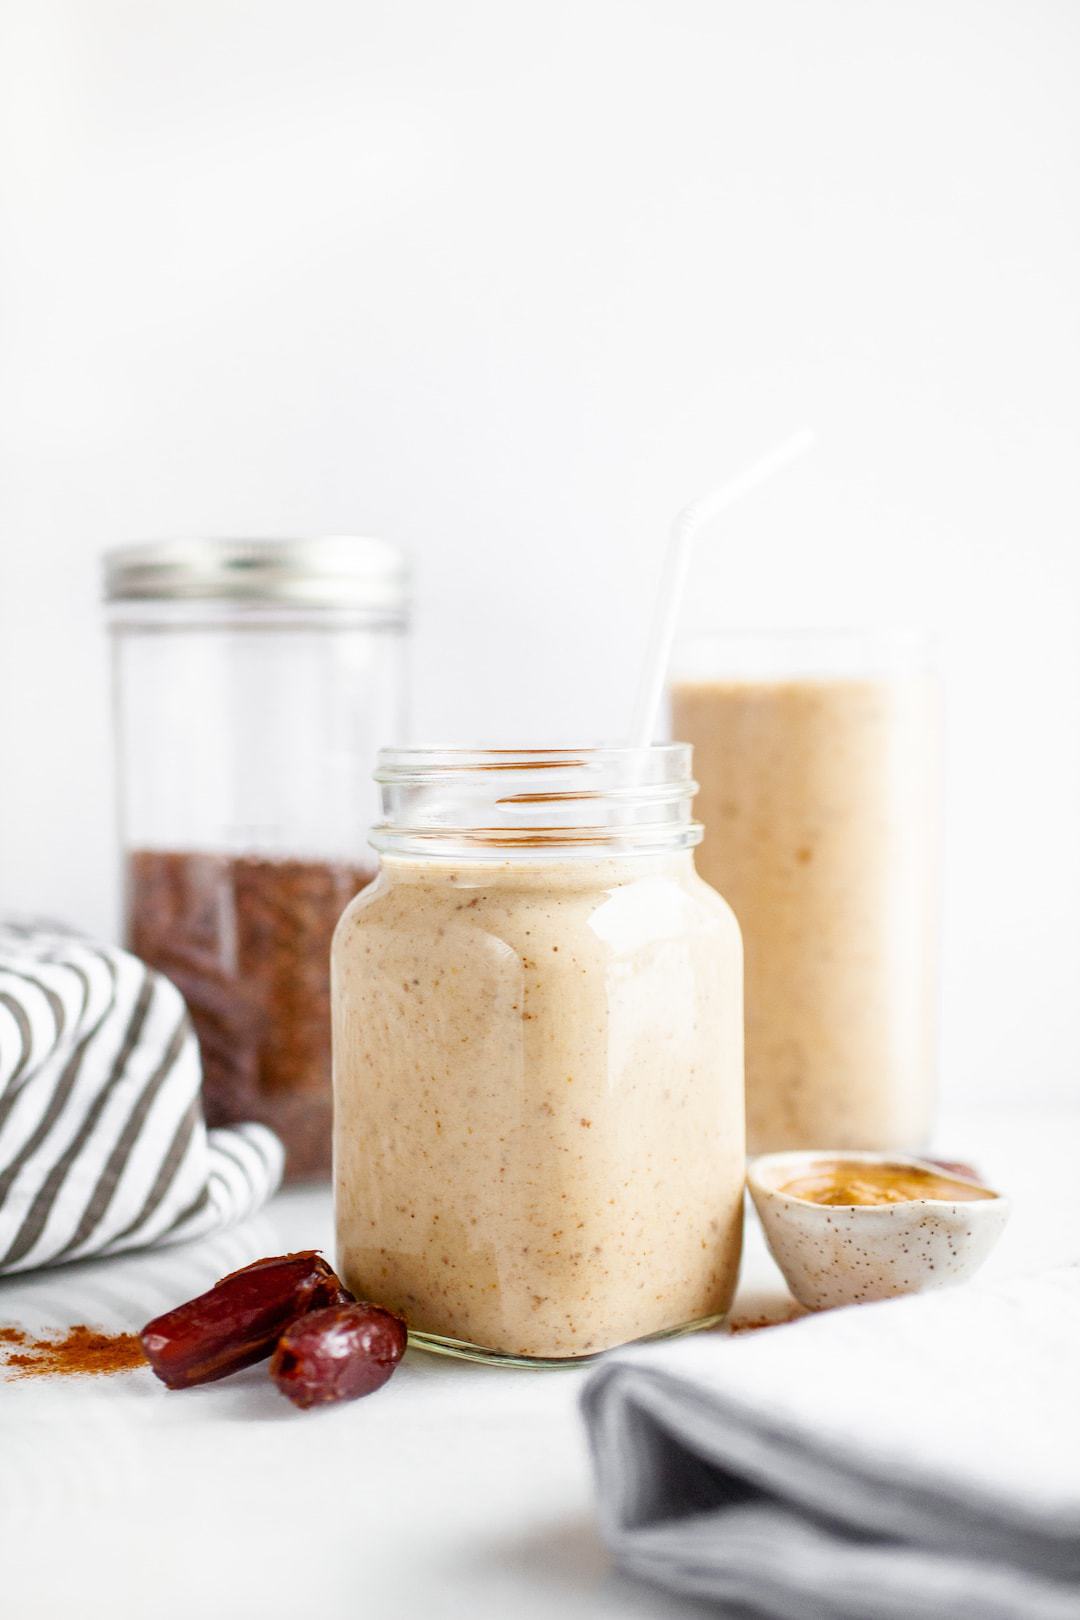 This healthy banana almond butter and medjool date smoothie recipe is the smoothie recipe of all smoothie recipes! It’s vegan (plant-based), packed with protein, so easy to make, full of fibre, and has a perfect touch of cinnamon! Great for breakfast or a snack or enjoy it as a smoothie bowl topped with your favourite granola! 